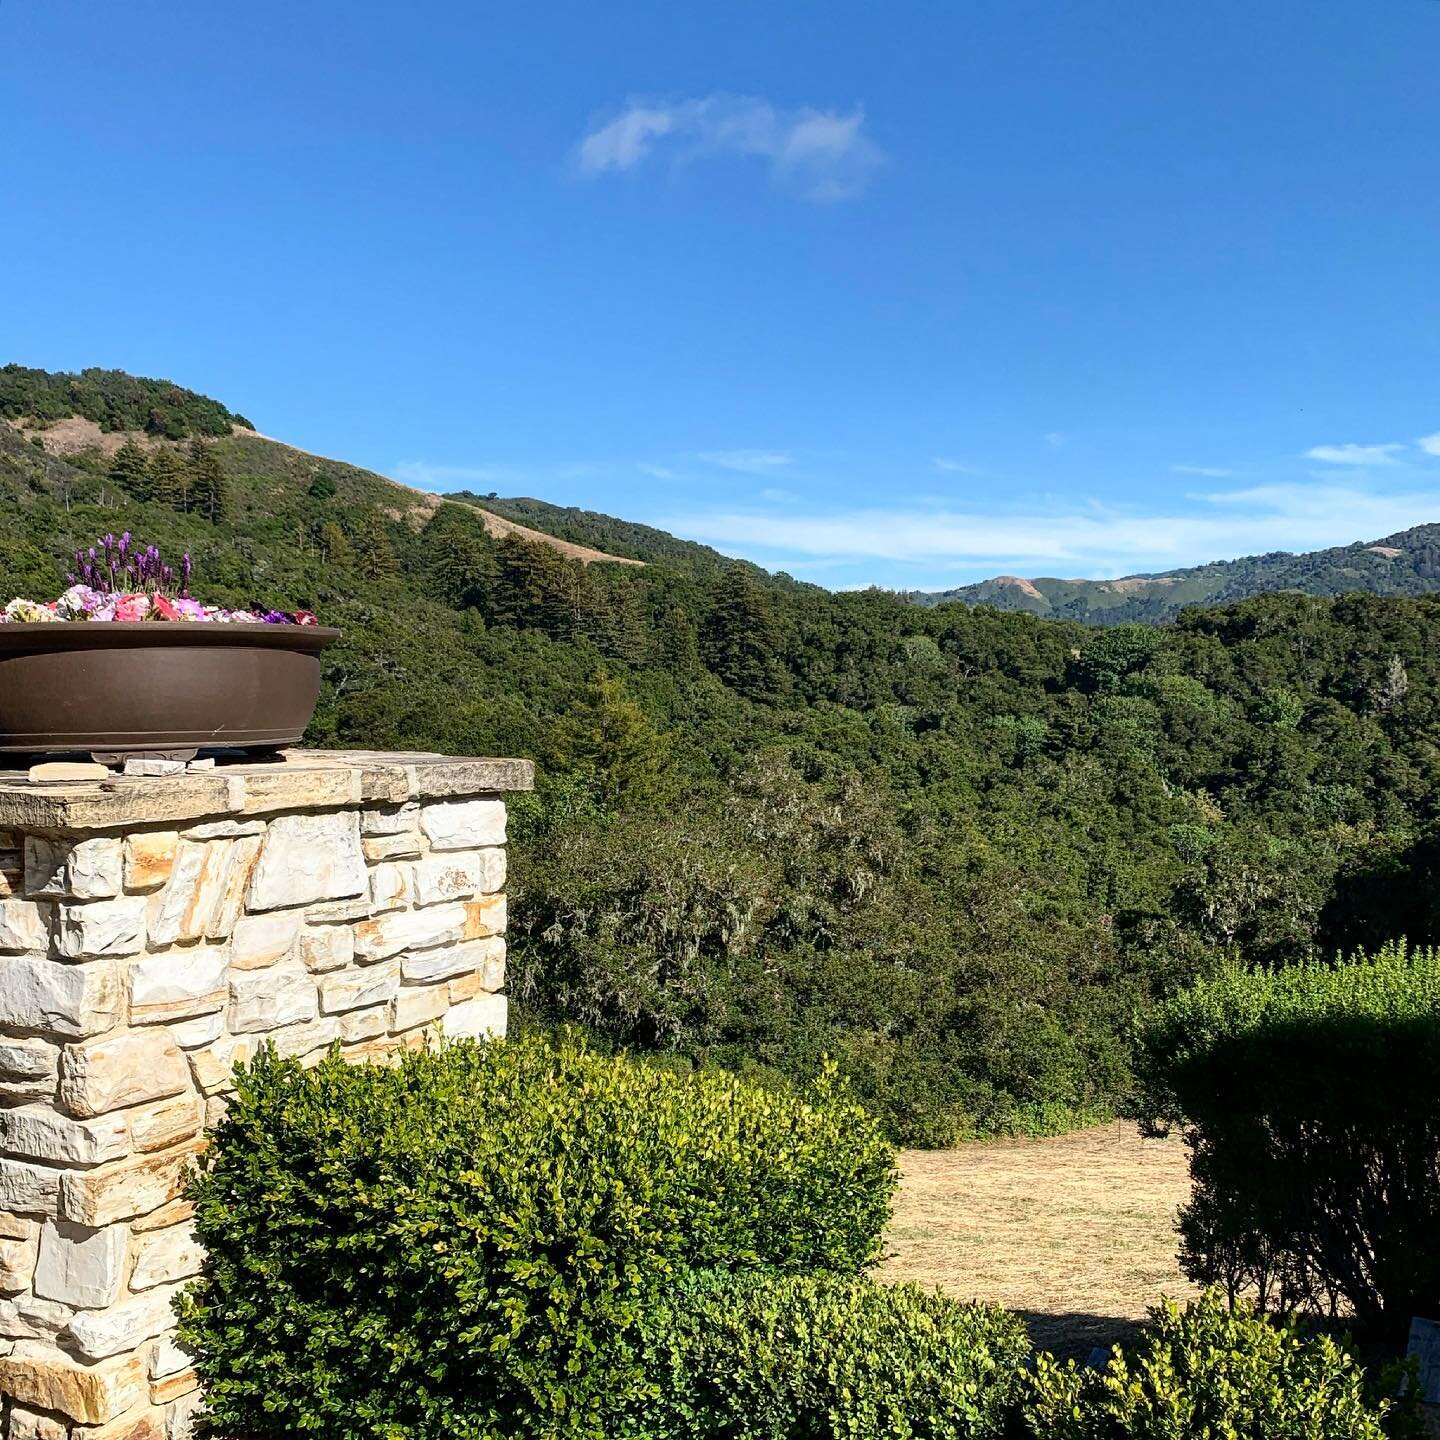 It is hard not to love every angle and view when you are in the Santa Lucia Preserve.  No other home in sight for miles, sculptured oaks that hang their sturdy branches over the road.  Birds of prey soaring through the air, circling again and again. 